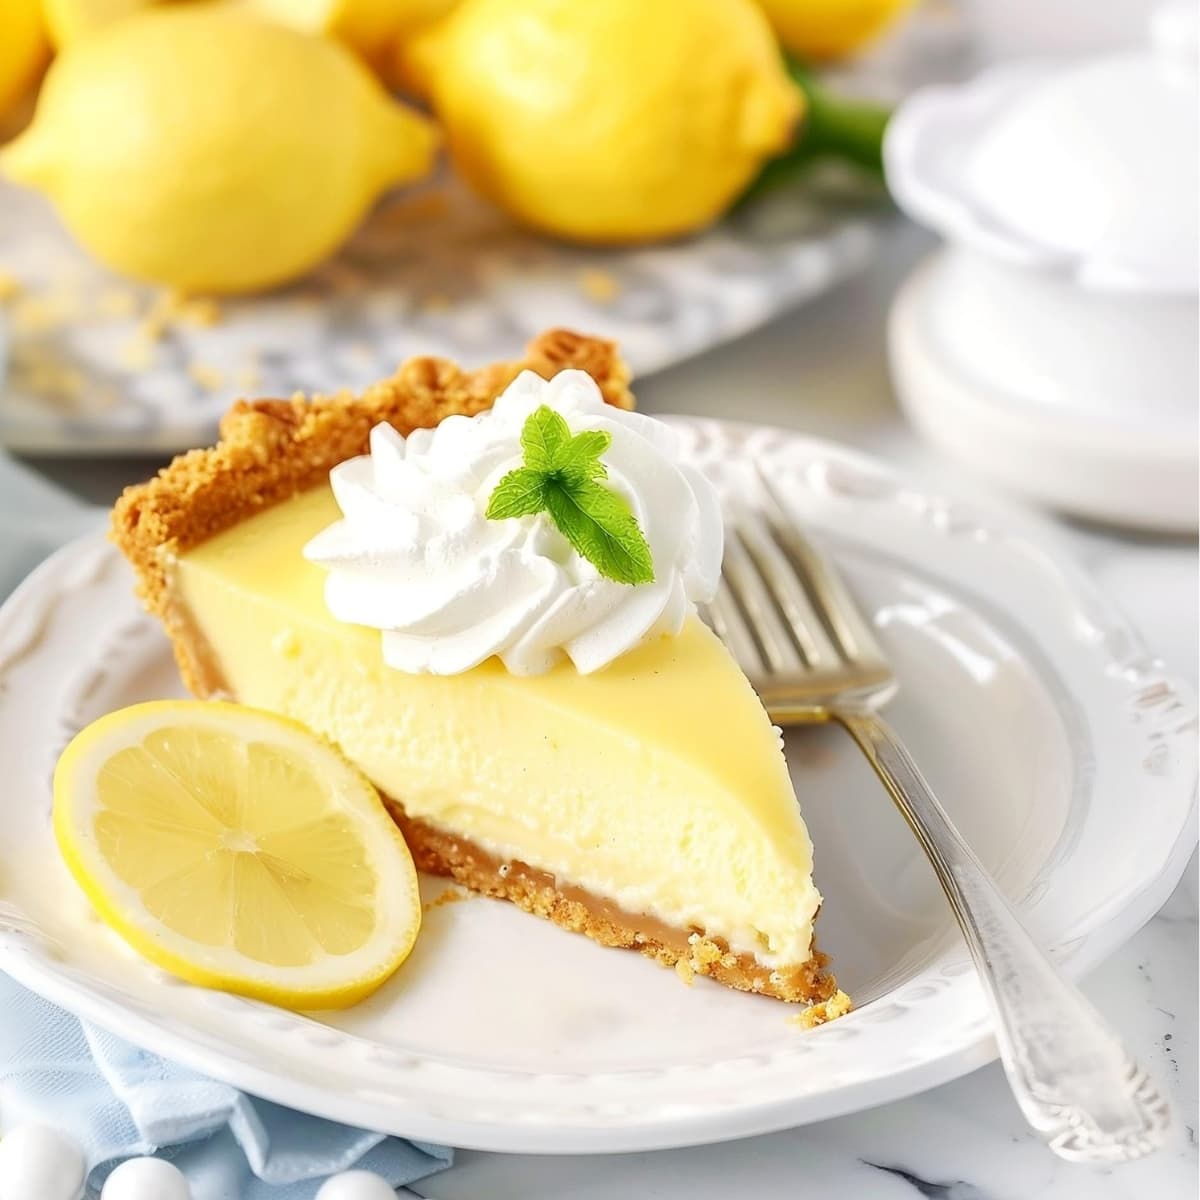 Creamy lemon icebox pie with whipped cream and mint